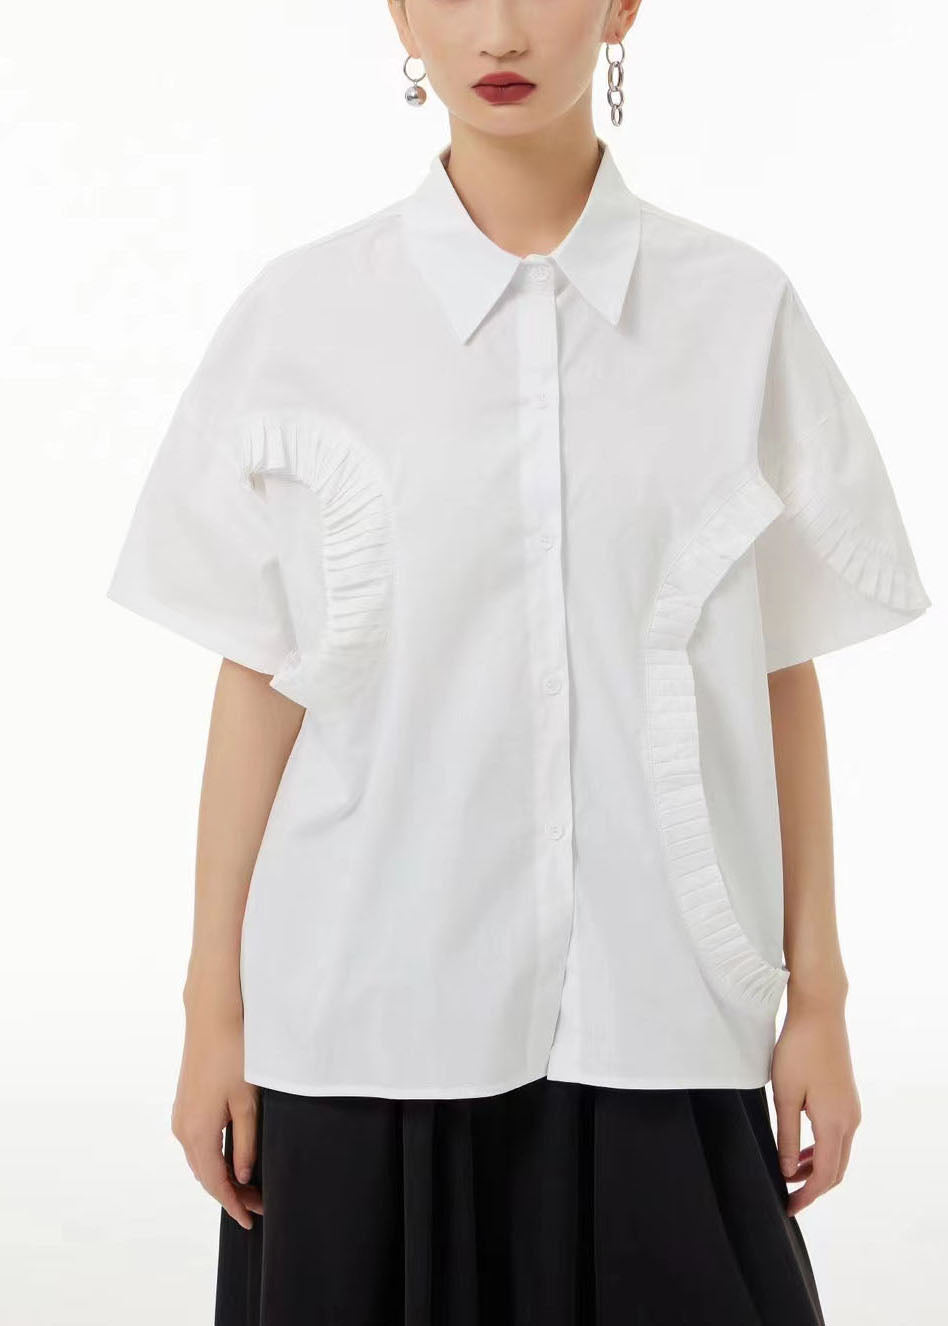 Style White Peter Pan Collar Wrinkled Cotton Shirt Top Summer LC0132